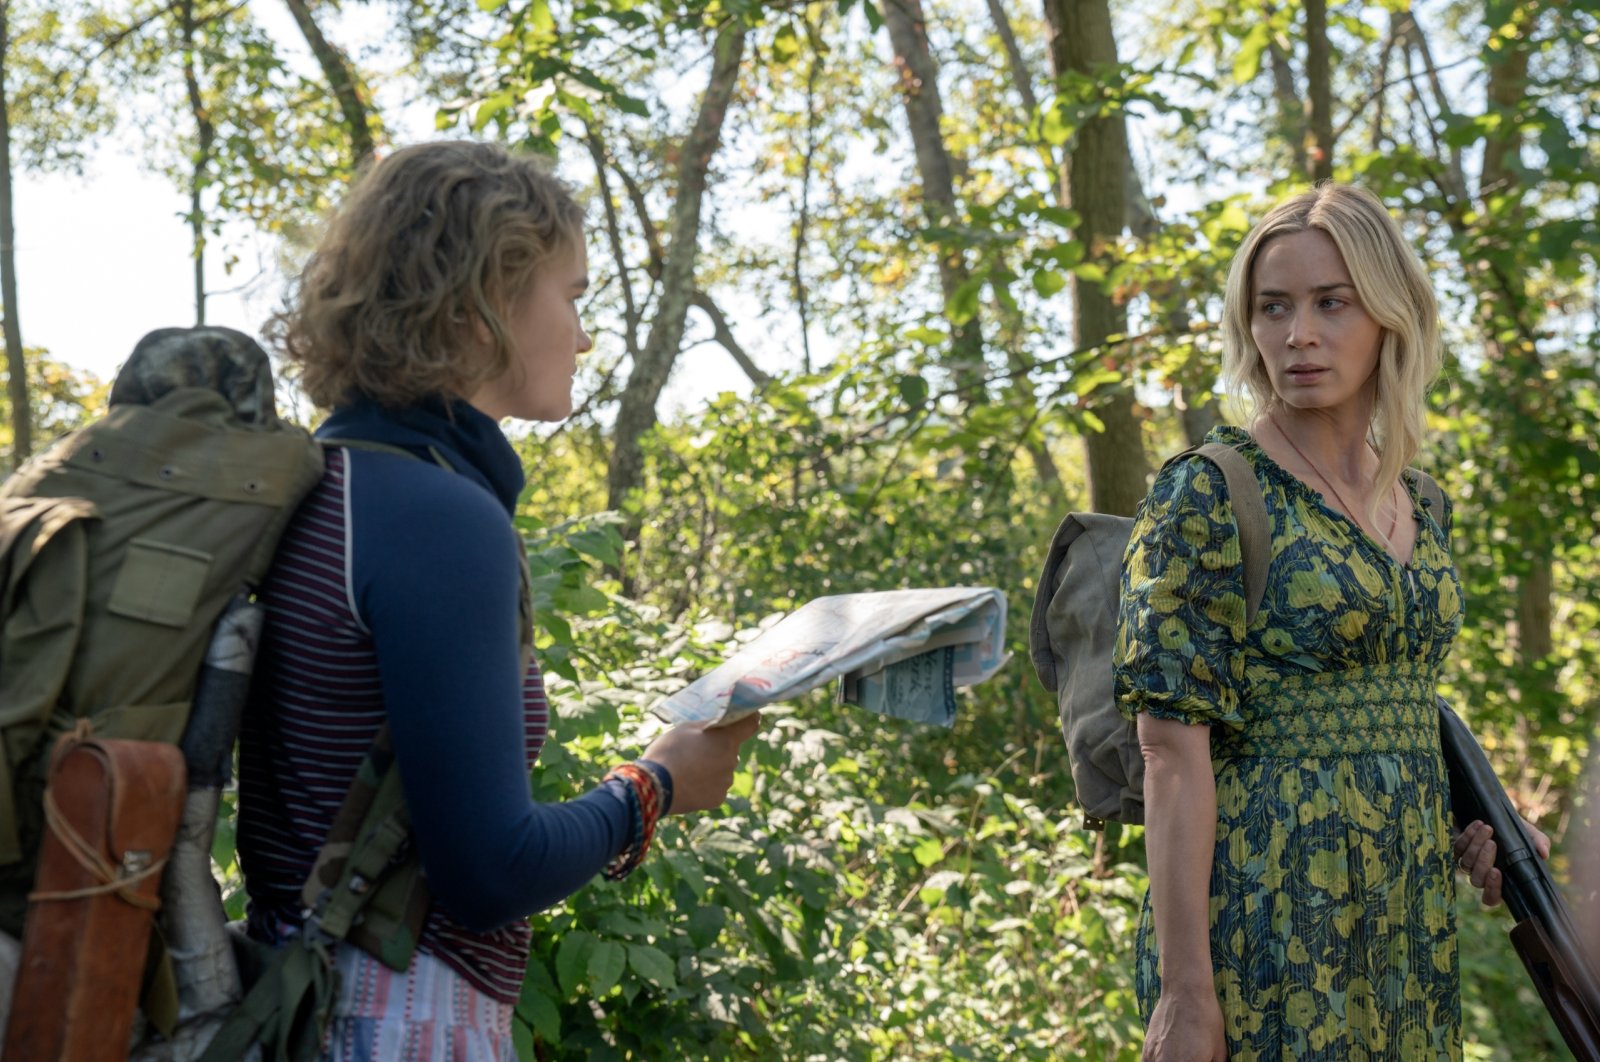 Millicent Simmonds (L) stars as Regan and Emily Blunt (R) as Evelyn in "A Quiet Place Part II." (DPA Photo)